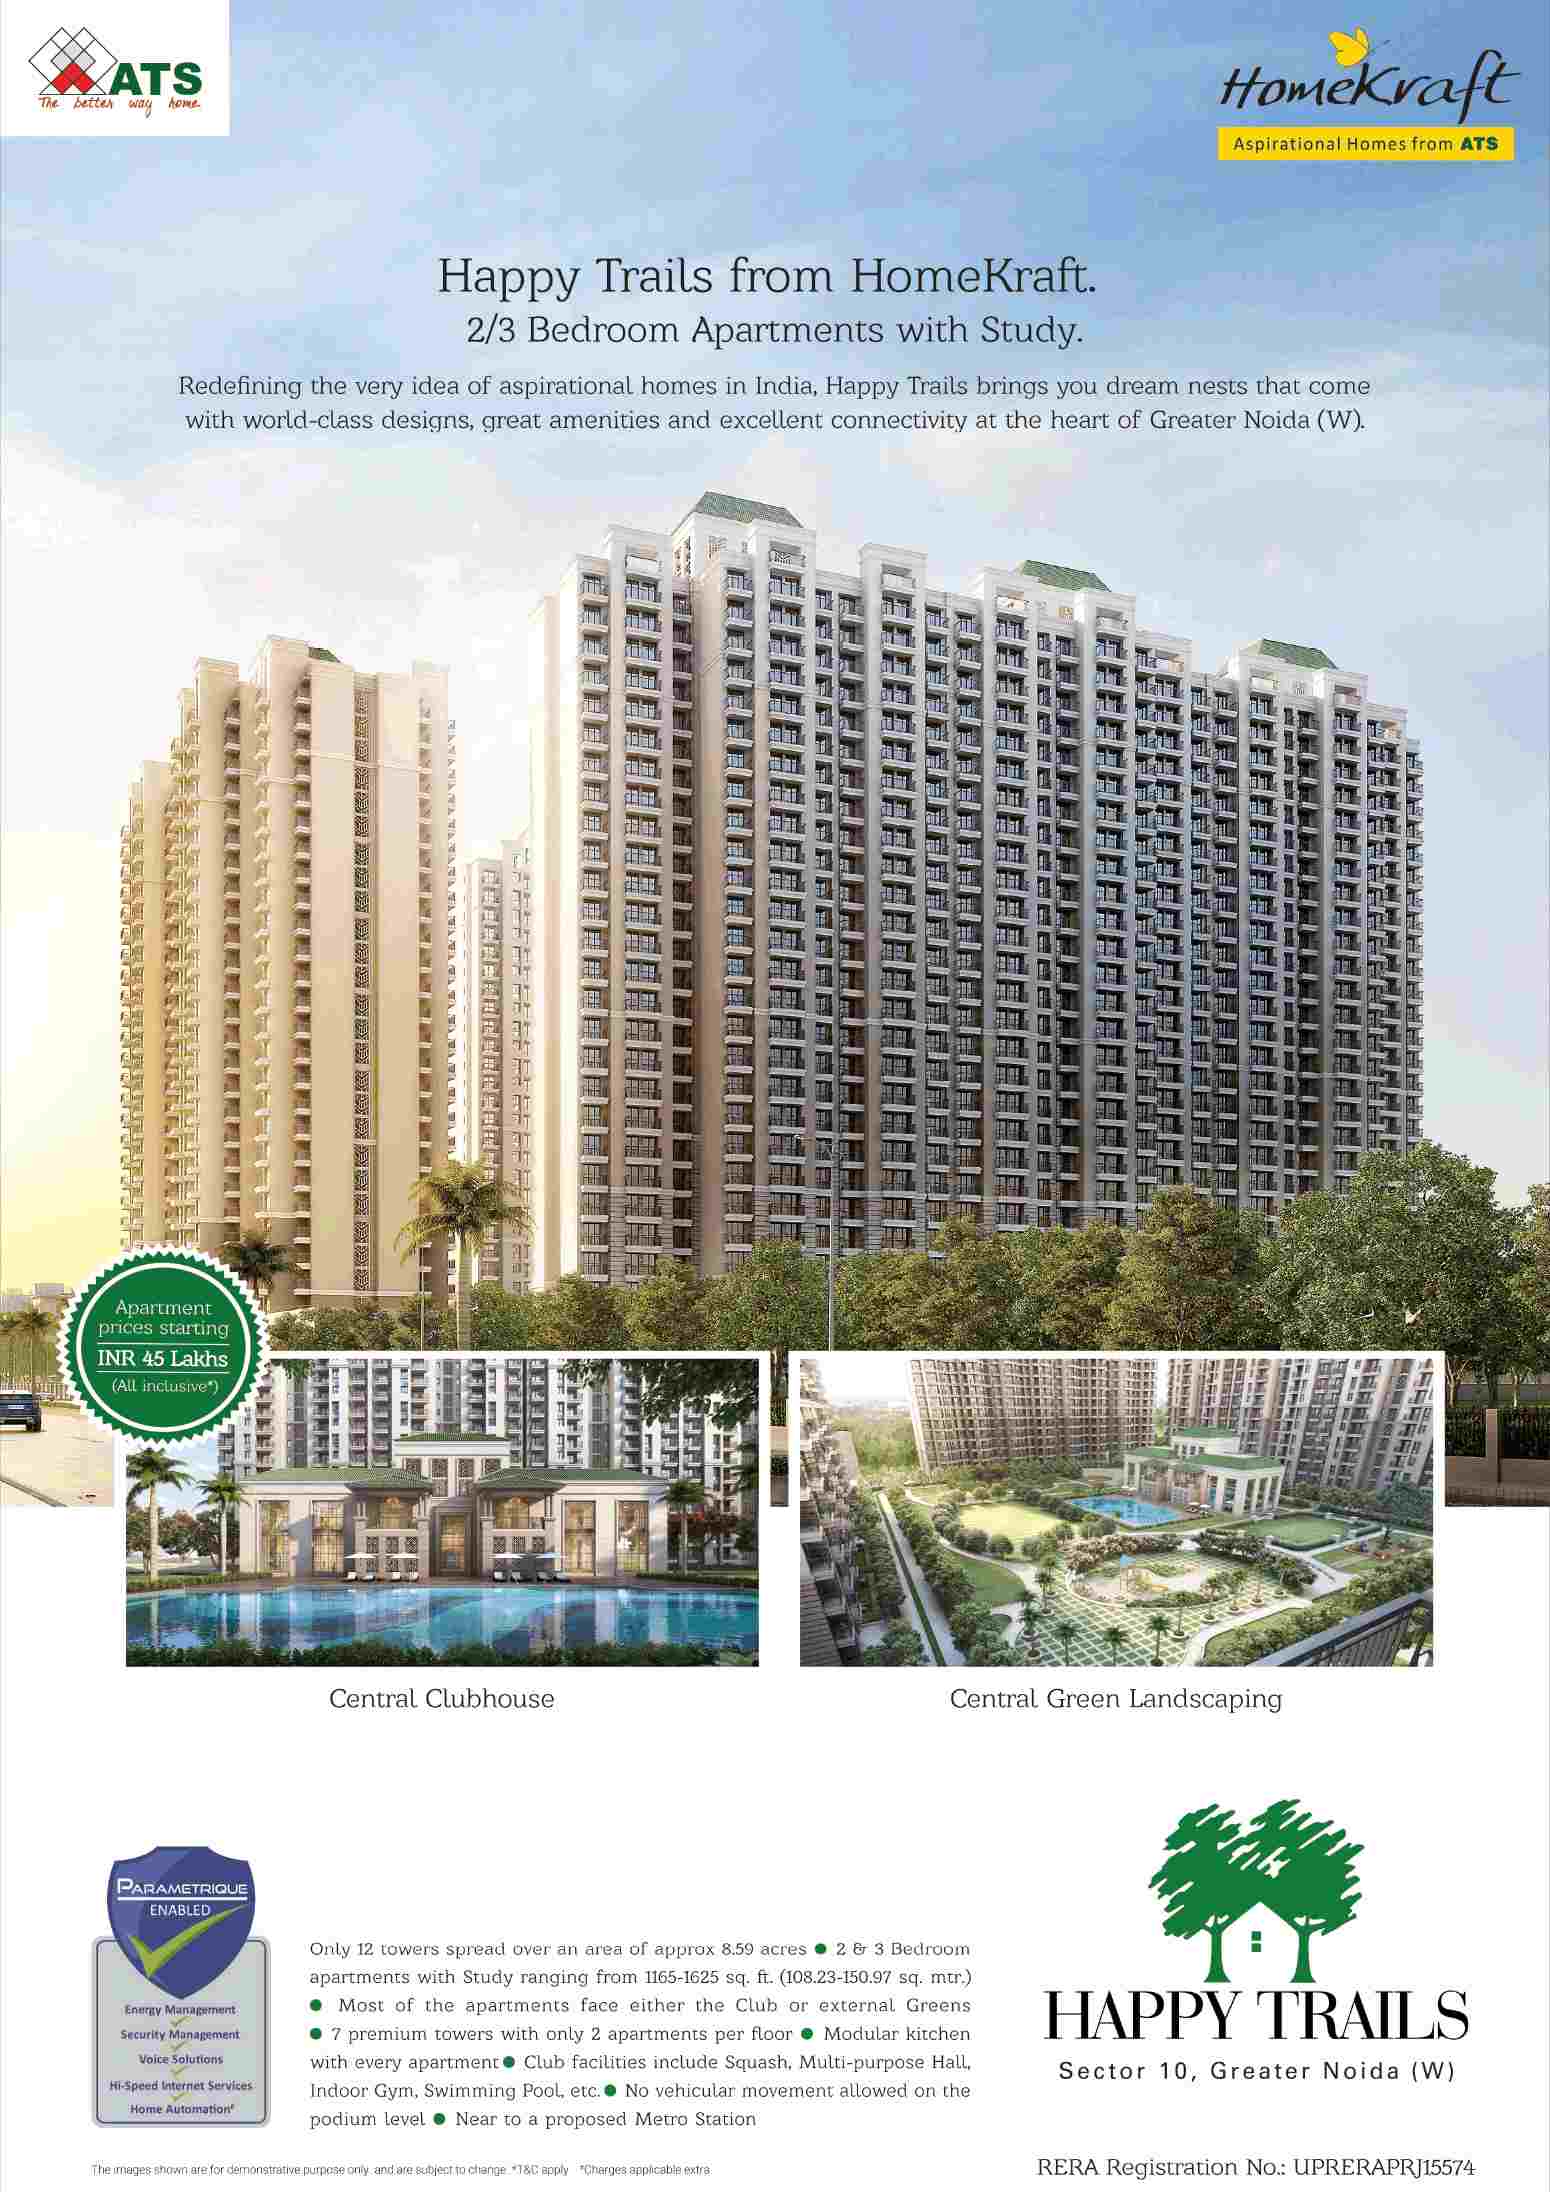 Book homes starting at Rs. 45 Lacs all inclusive at ATS Happy Trails in Greater Noida Update